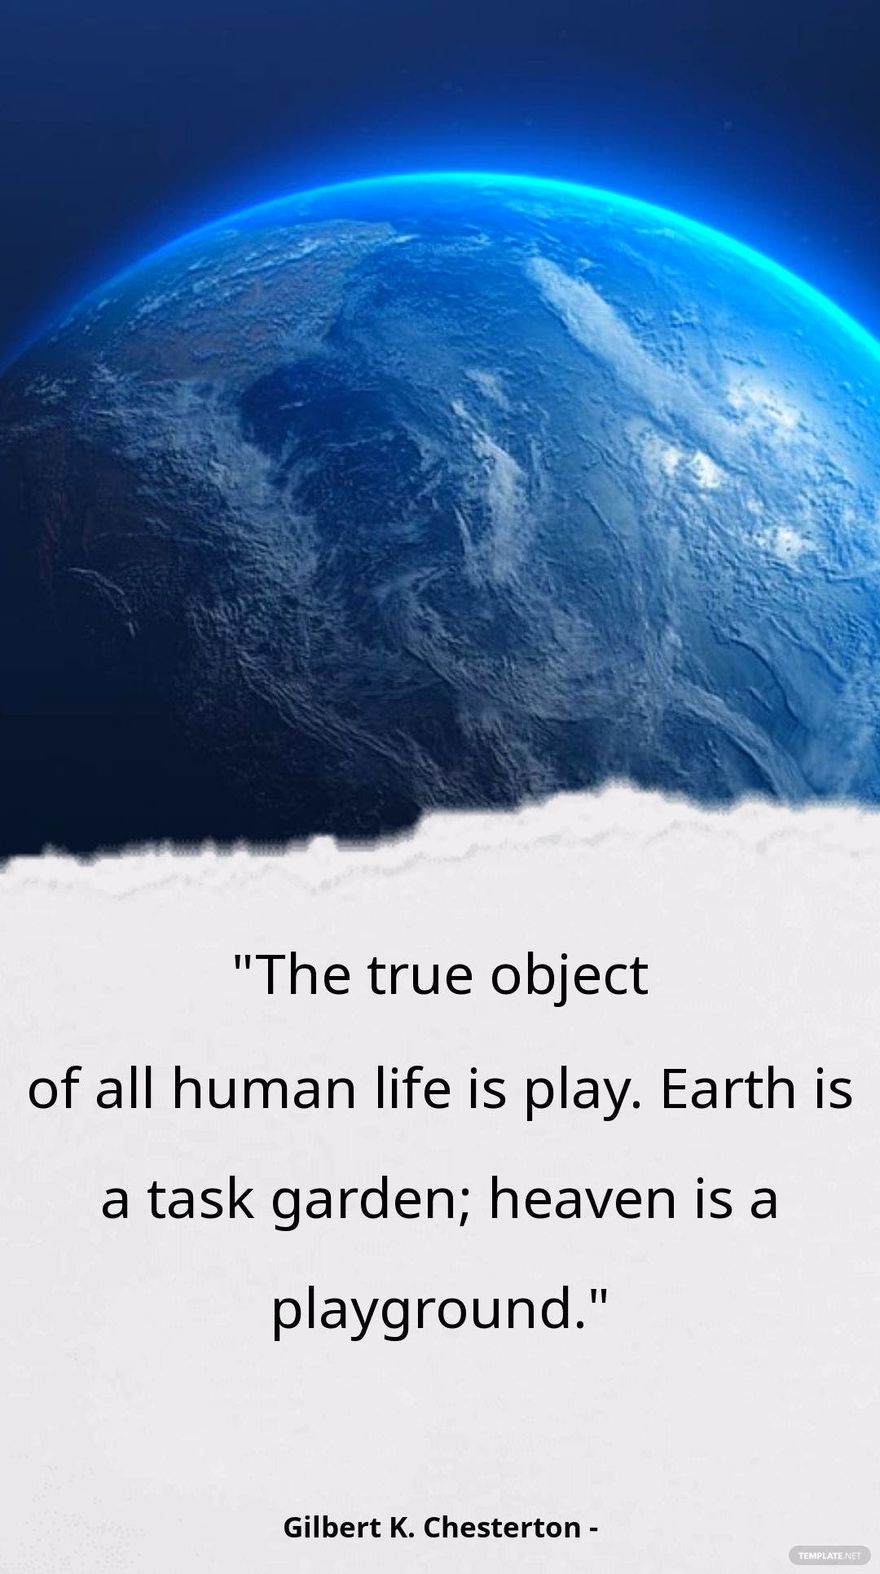 Gilbert K. Chesterton - The true object of all human life is play. Earth is a task garden; heaven is a playground.